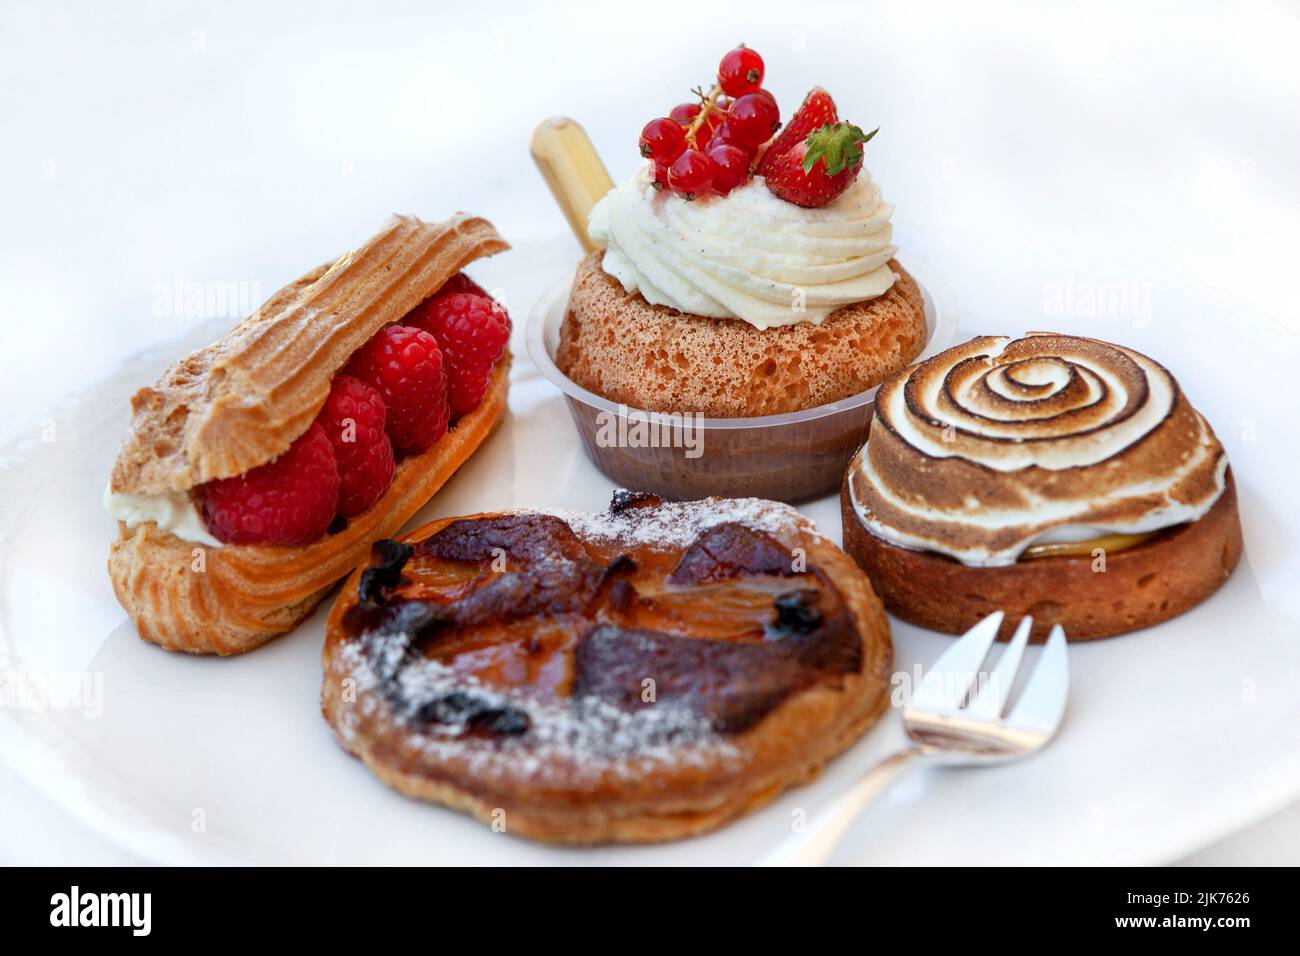 Collection of pastries on a white plate Stock Photo